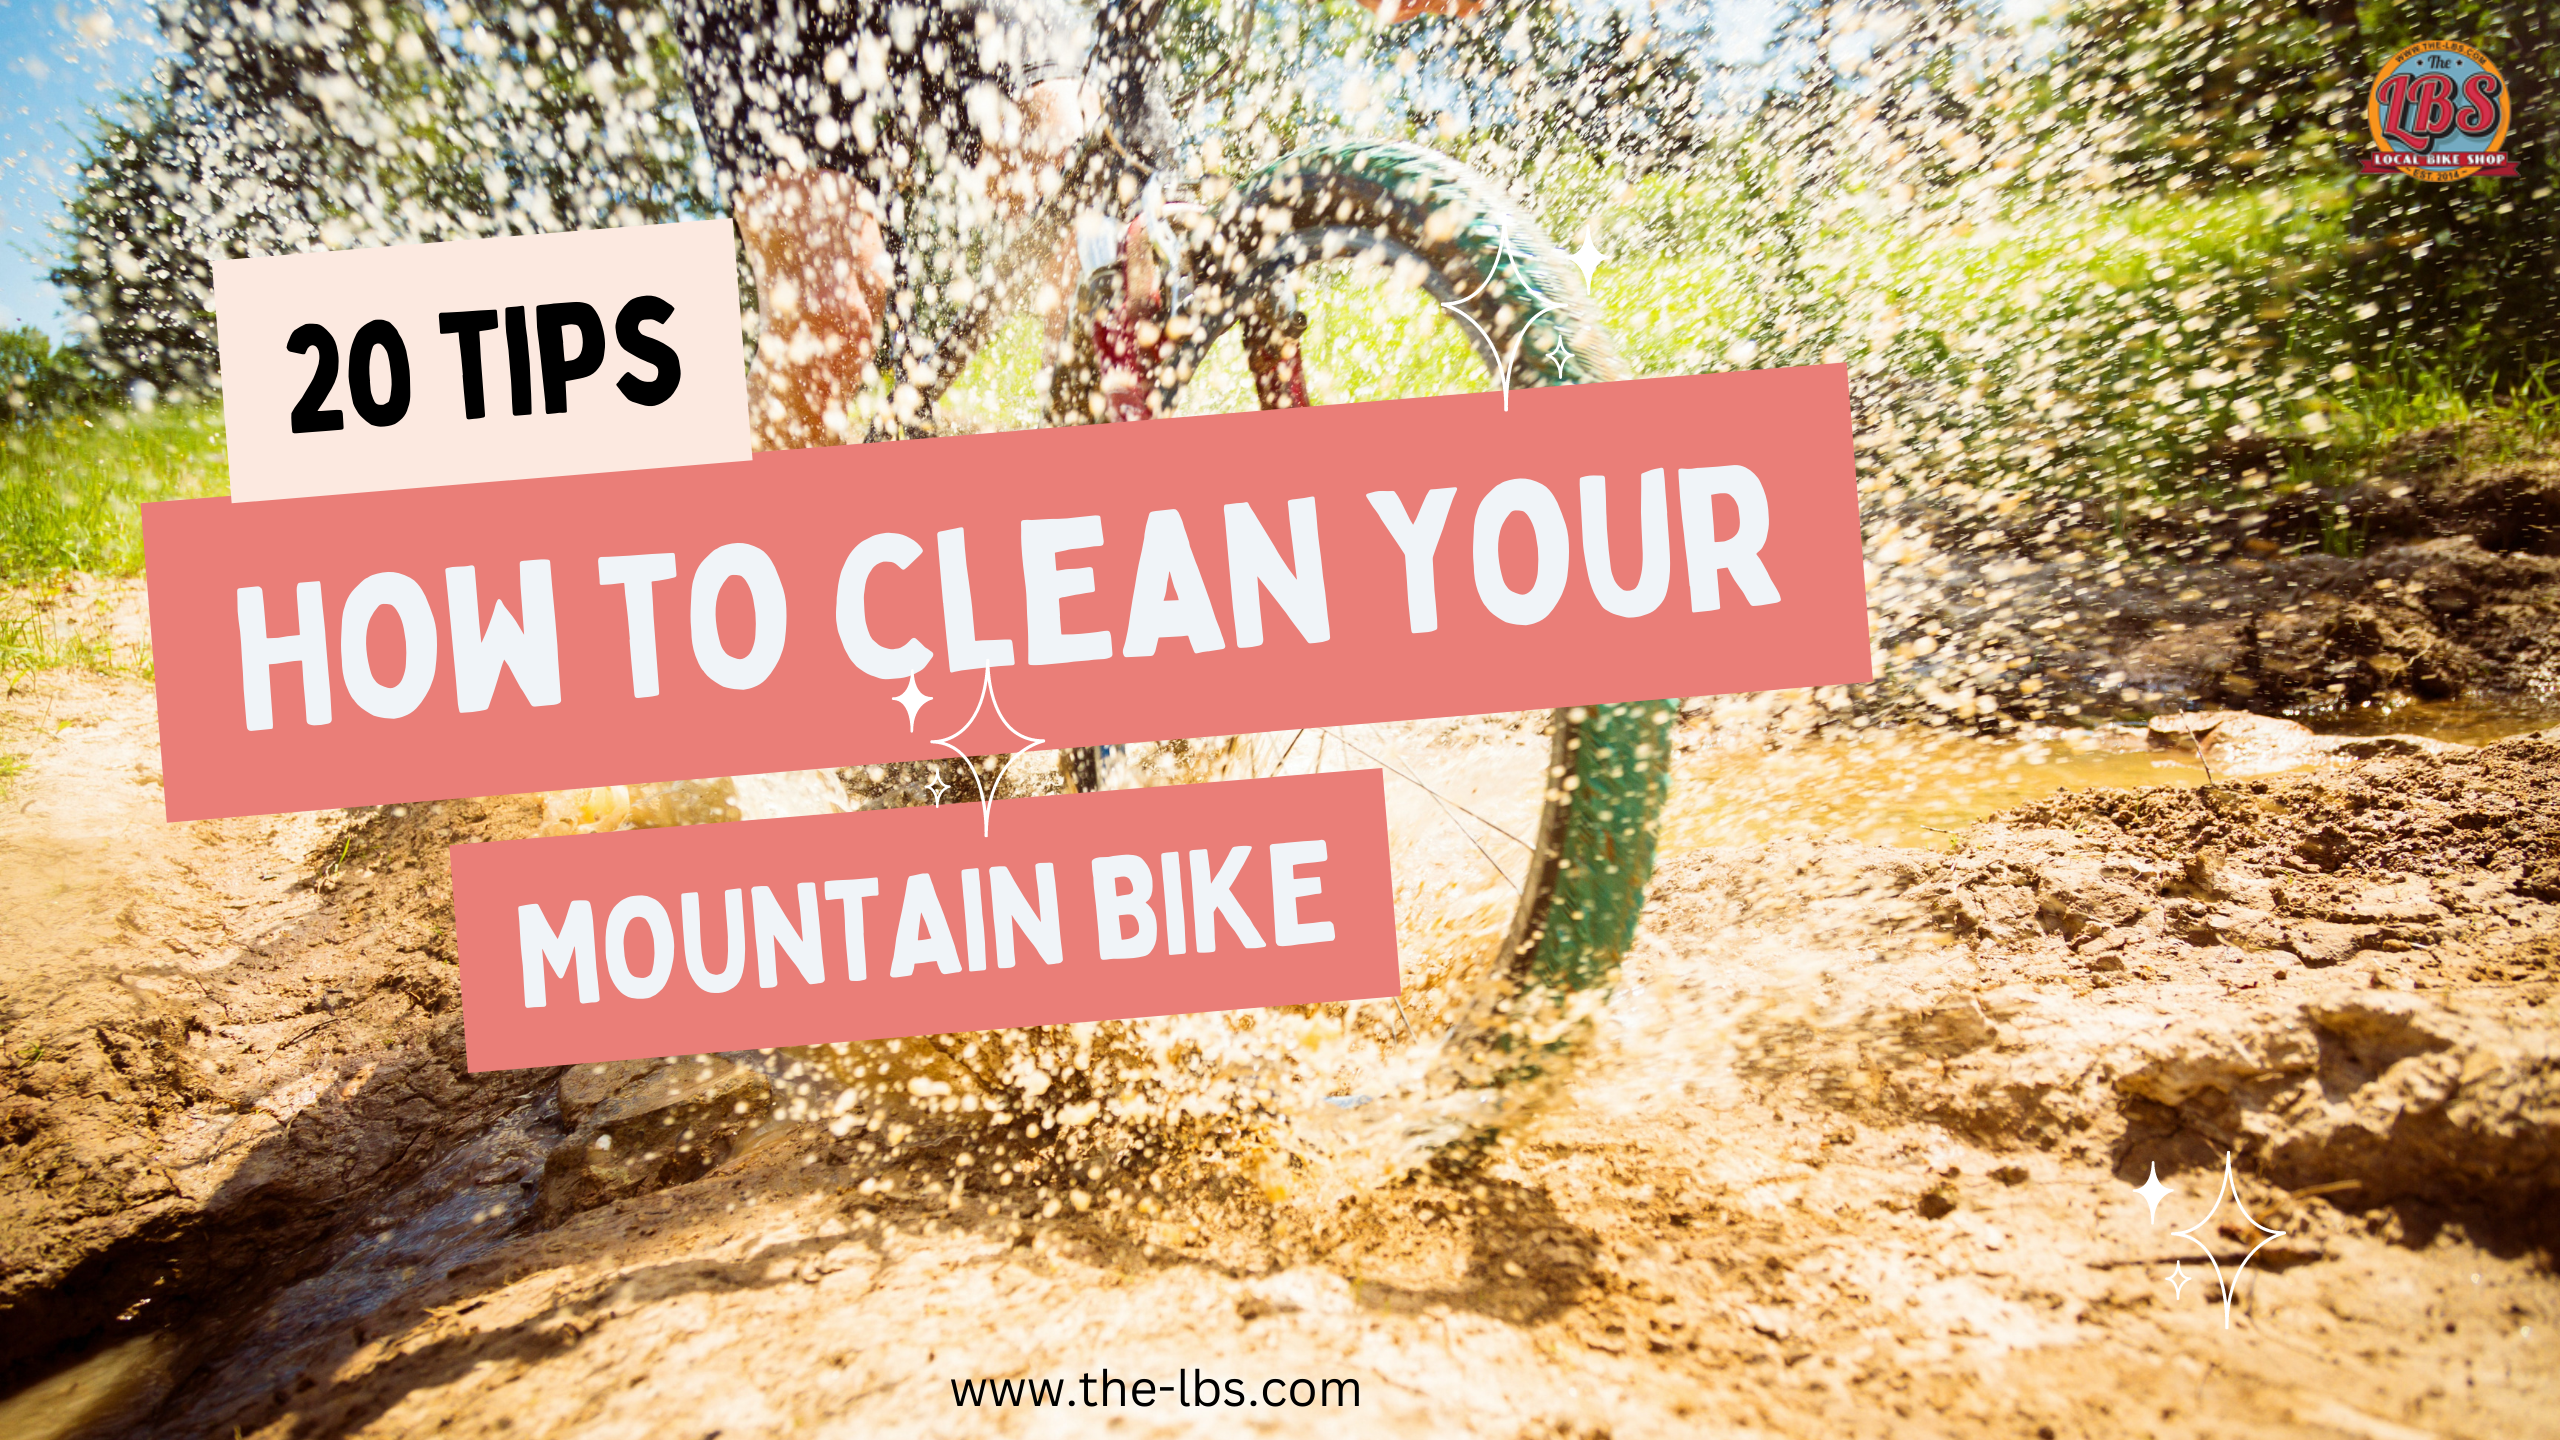 How-to-clean-mountain-bies-20-tips